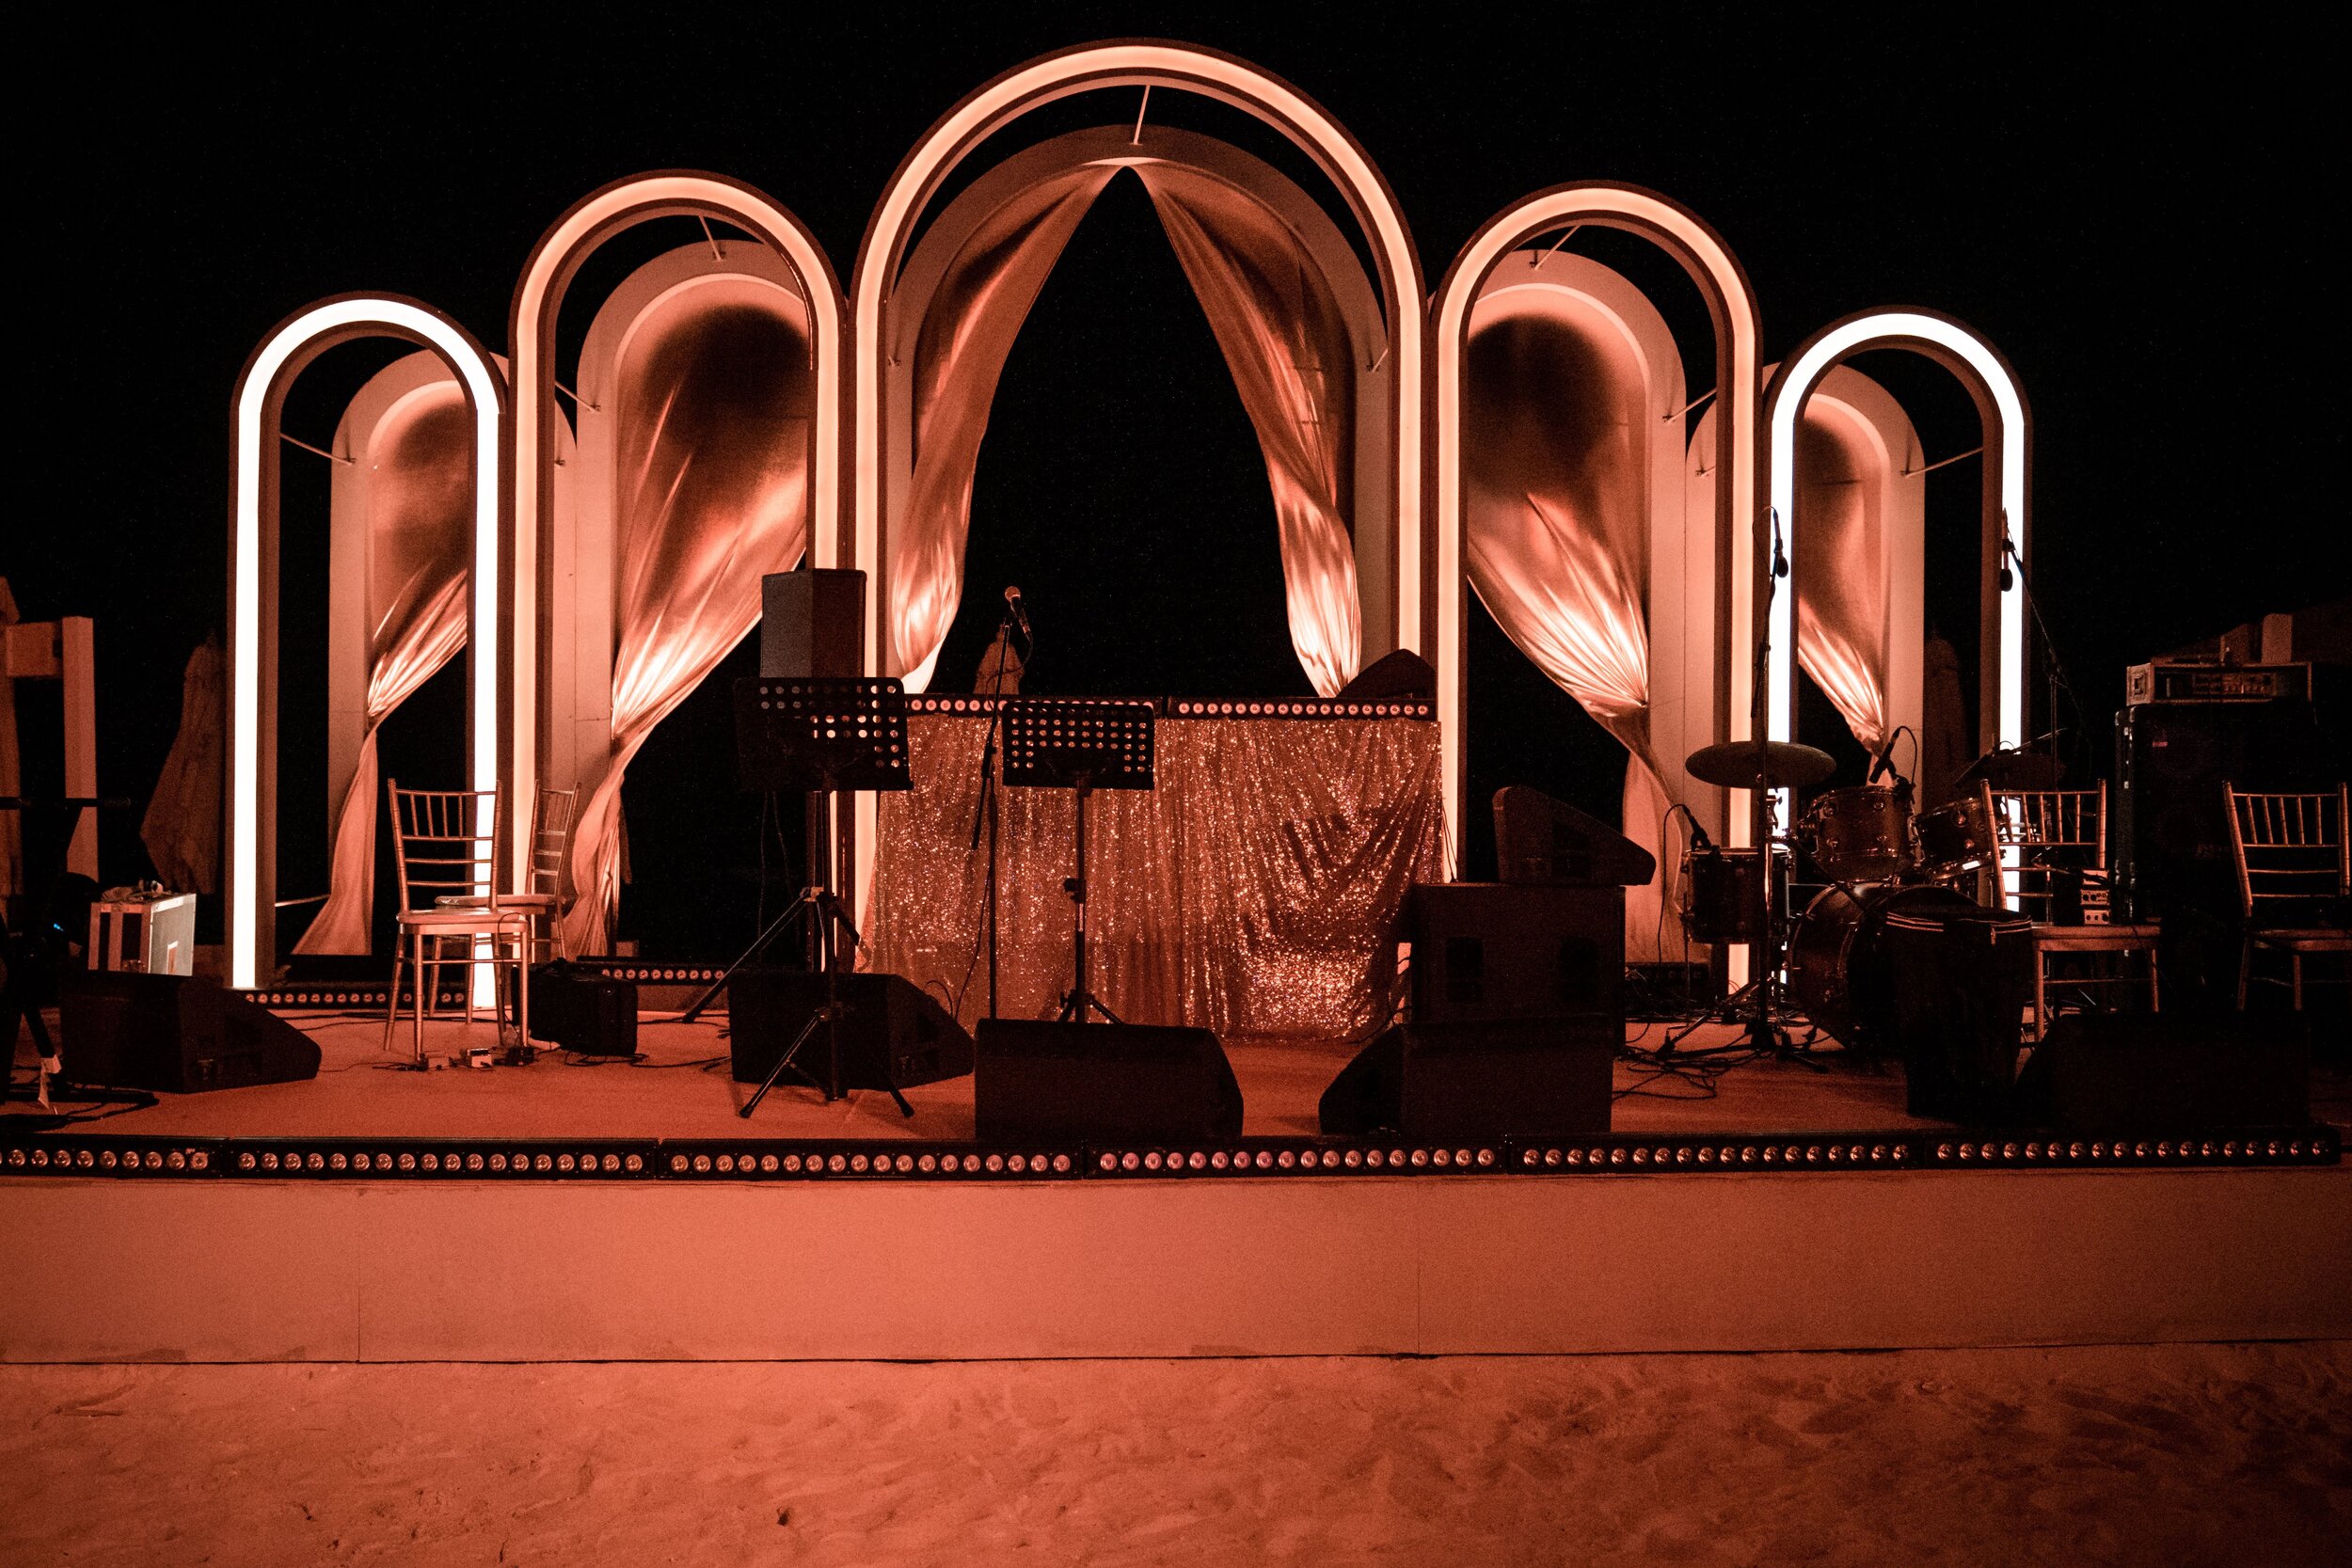  Stage setup ideas in egypt By Byganz  